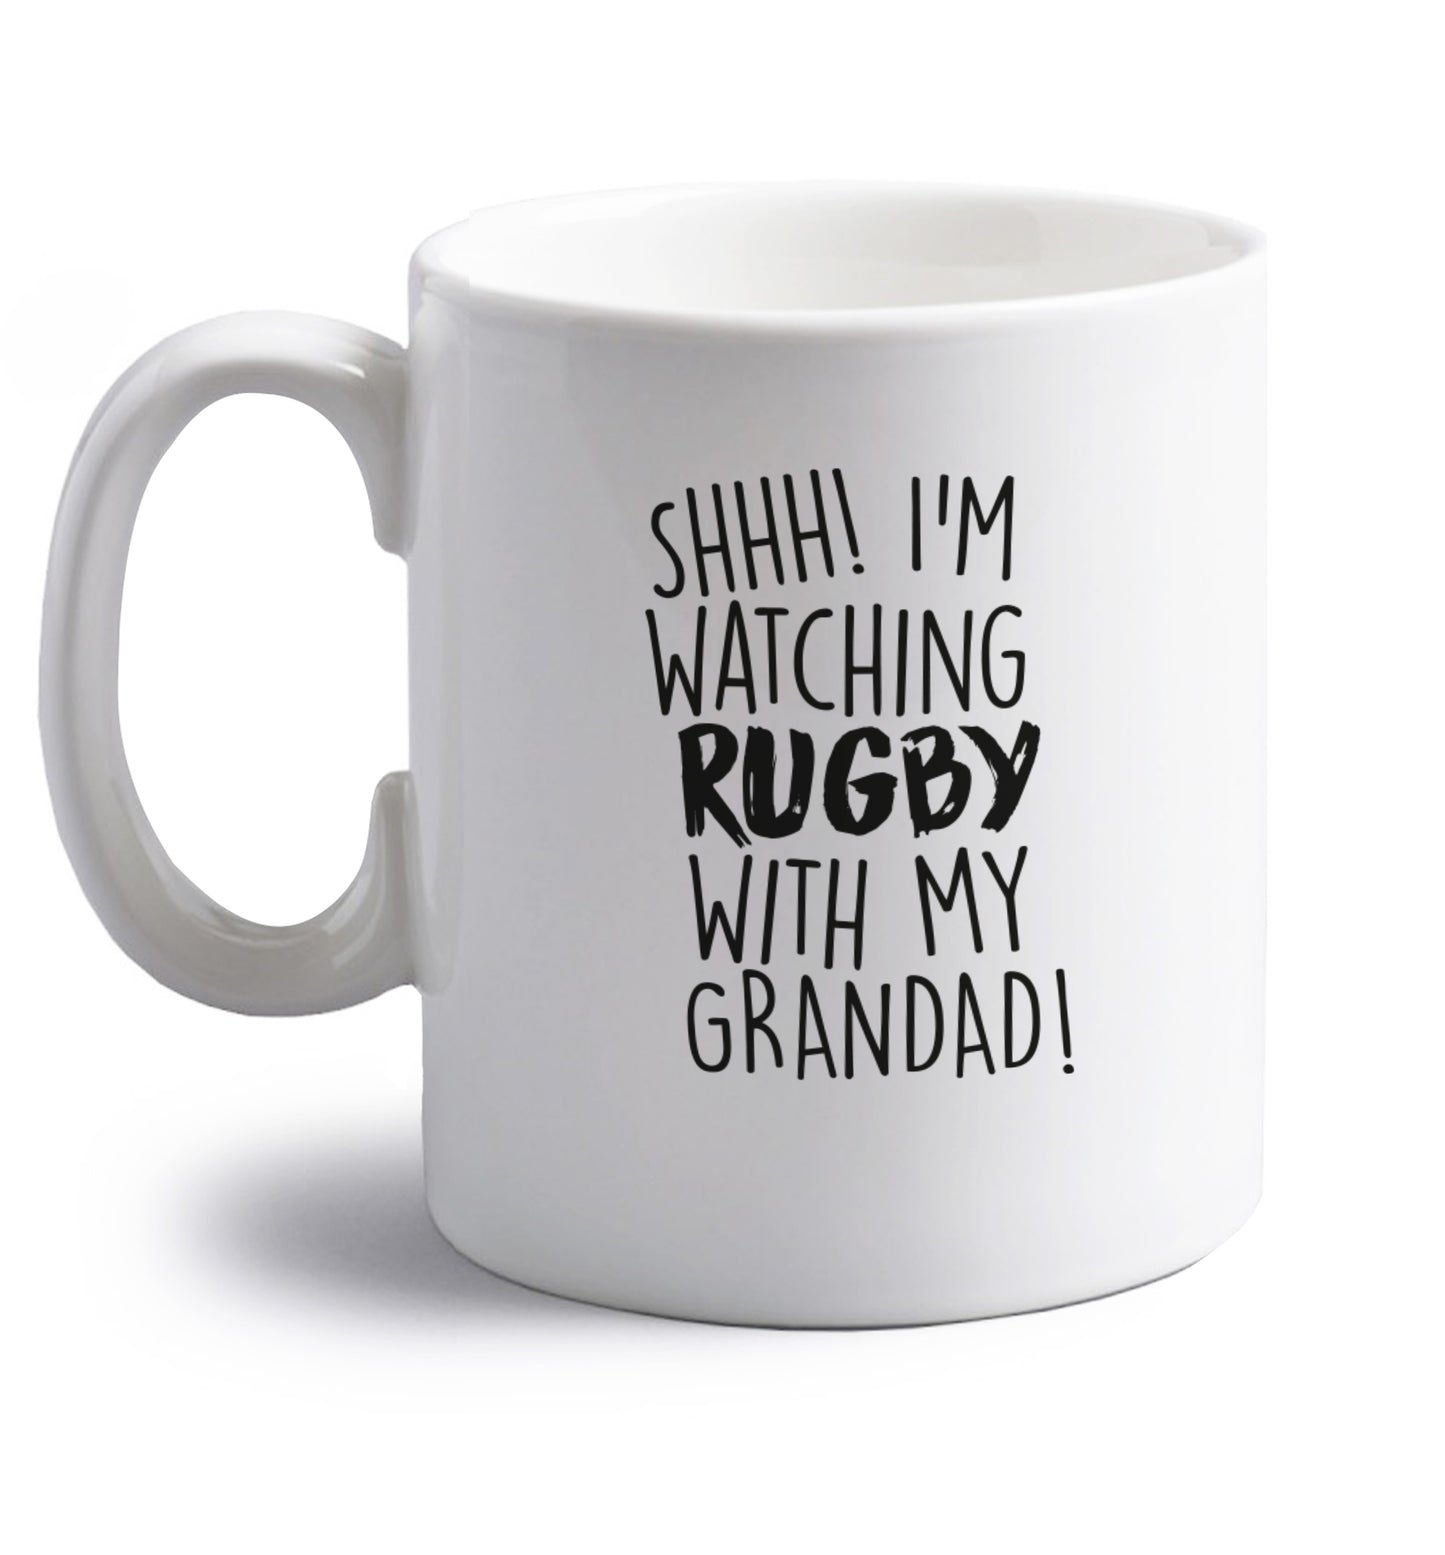 Shh I'm watching rugby with my grandad right handed white ceramic mug 